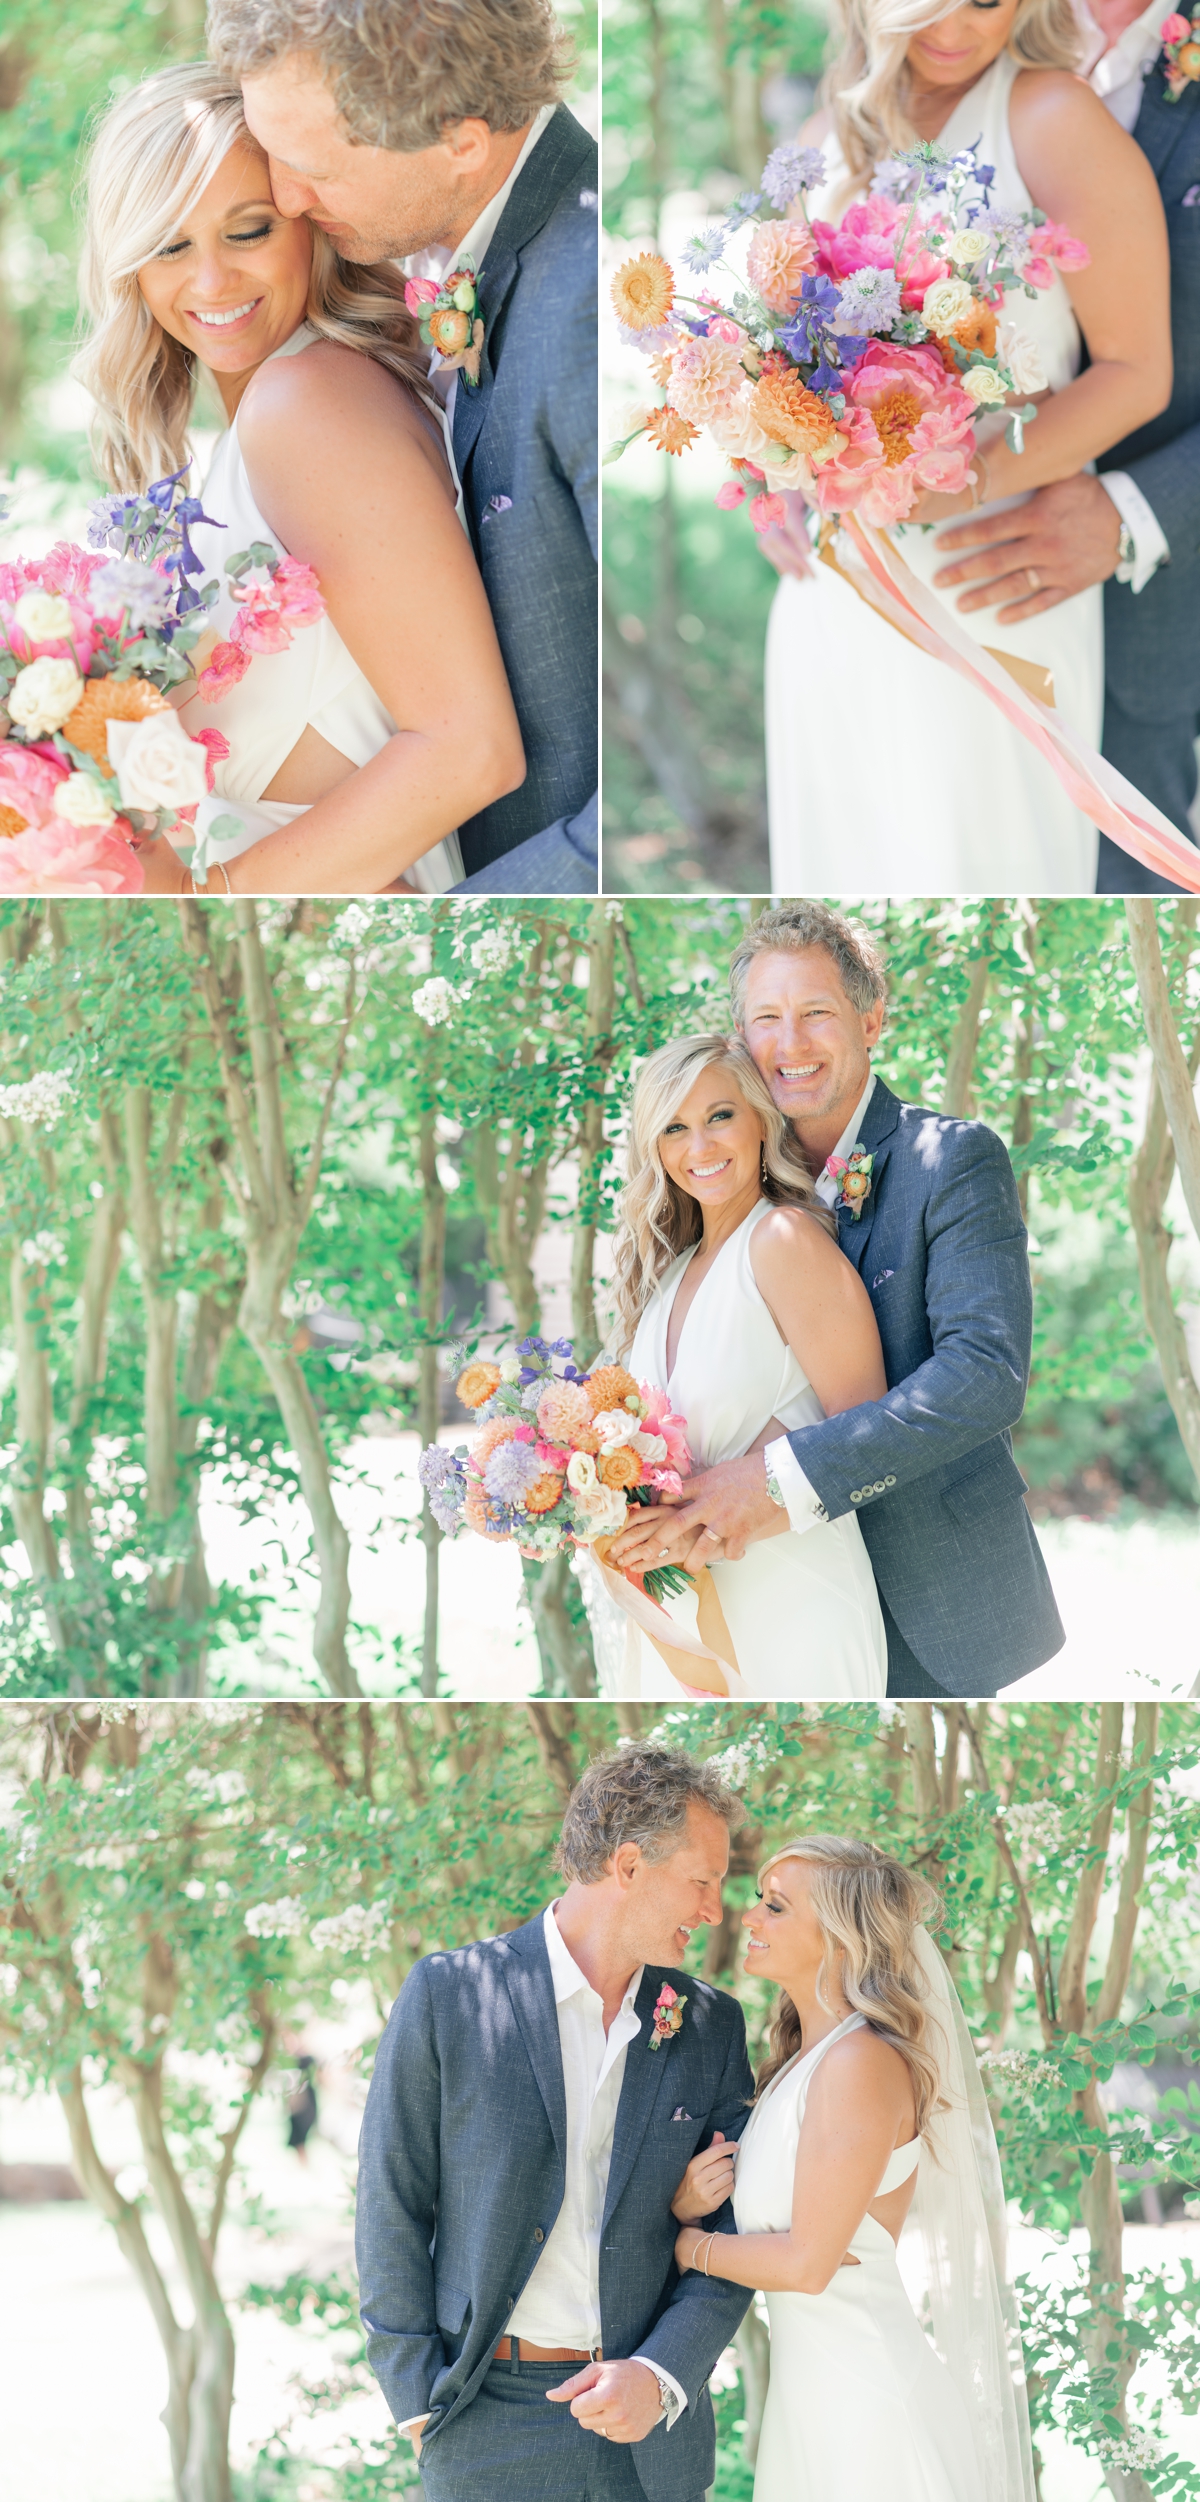 colorful bouquet is a featured detail of this simple backyard intimate summer wedding